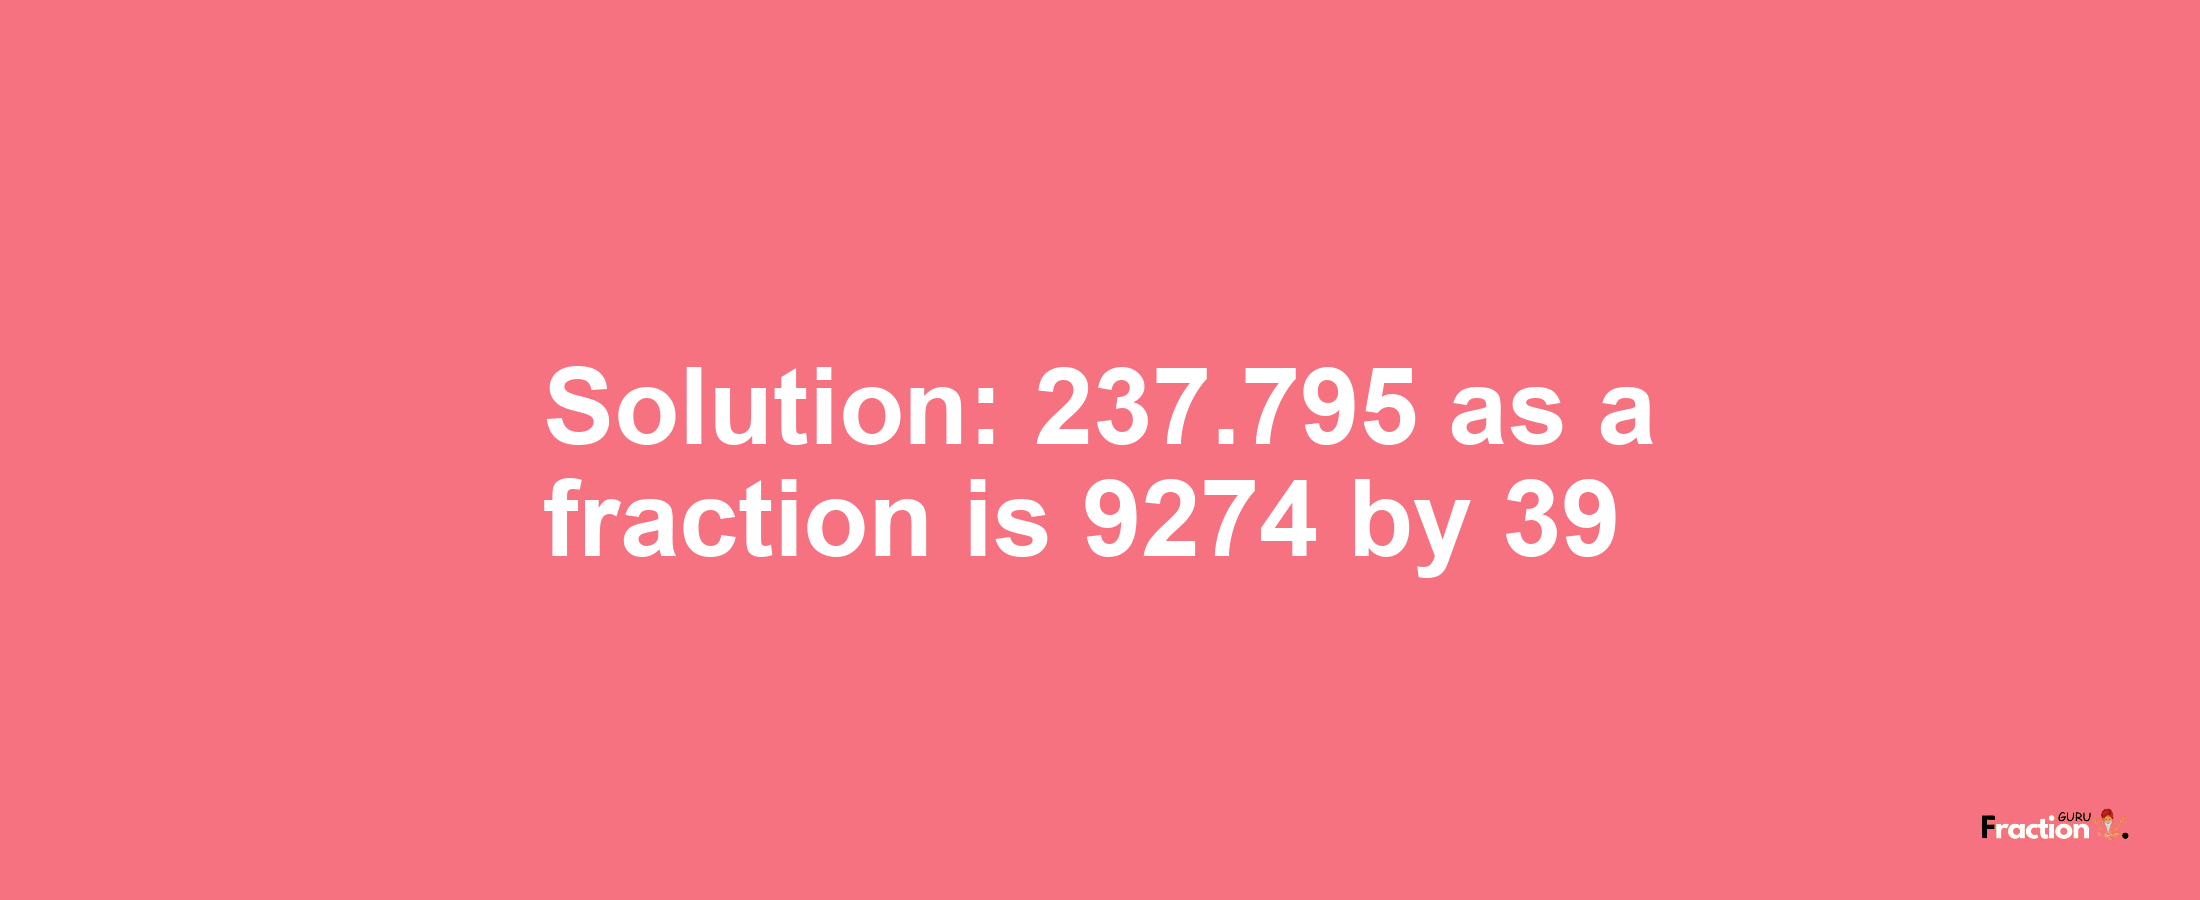 Solution:237.795 as a fraction is 9274/39